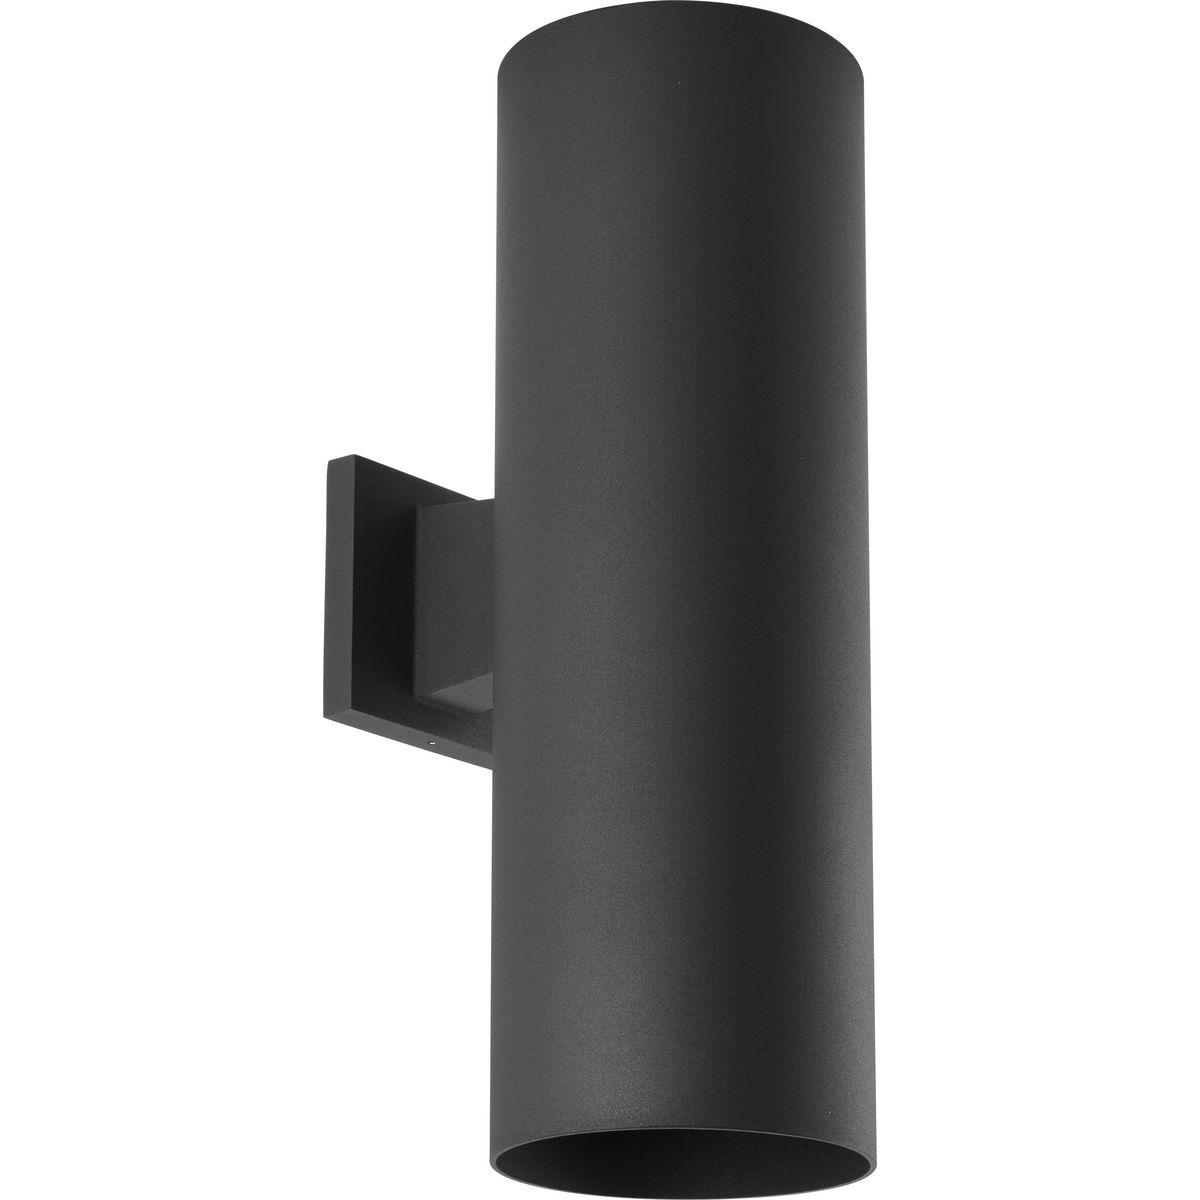 Hubbell P5642-31 6" uplight/downlight wall cylinders are ideal for a wide variety of interior and exterior applications including residential and commercial. The aluminum Cylinders offers a contemporary design with its sleek cylindrical form and elegant Black finish, perf